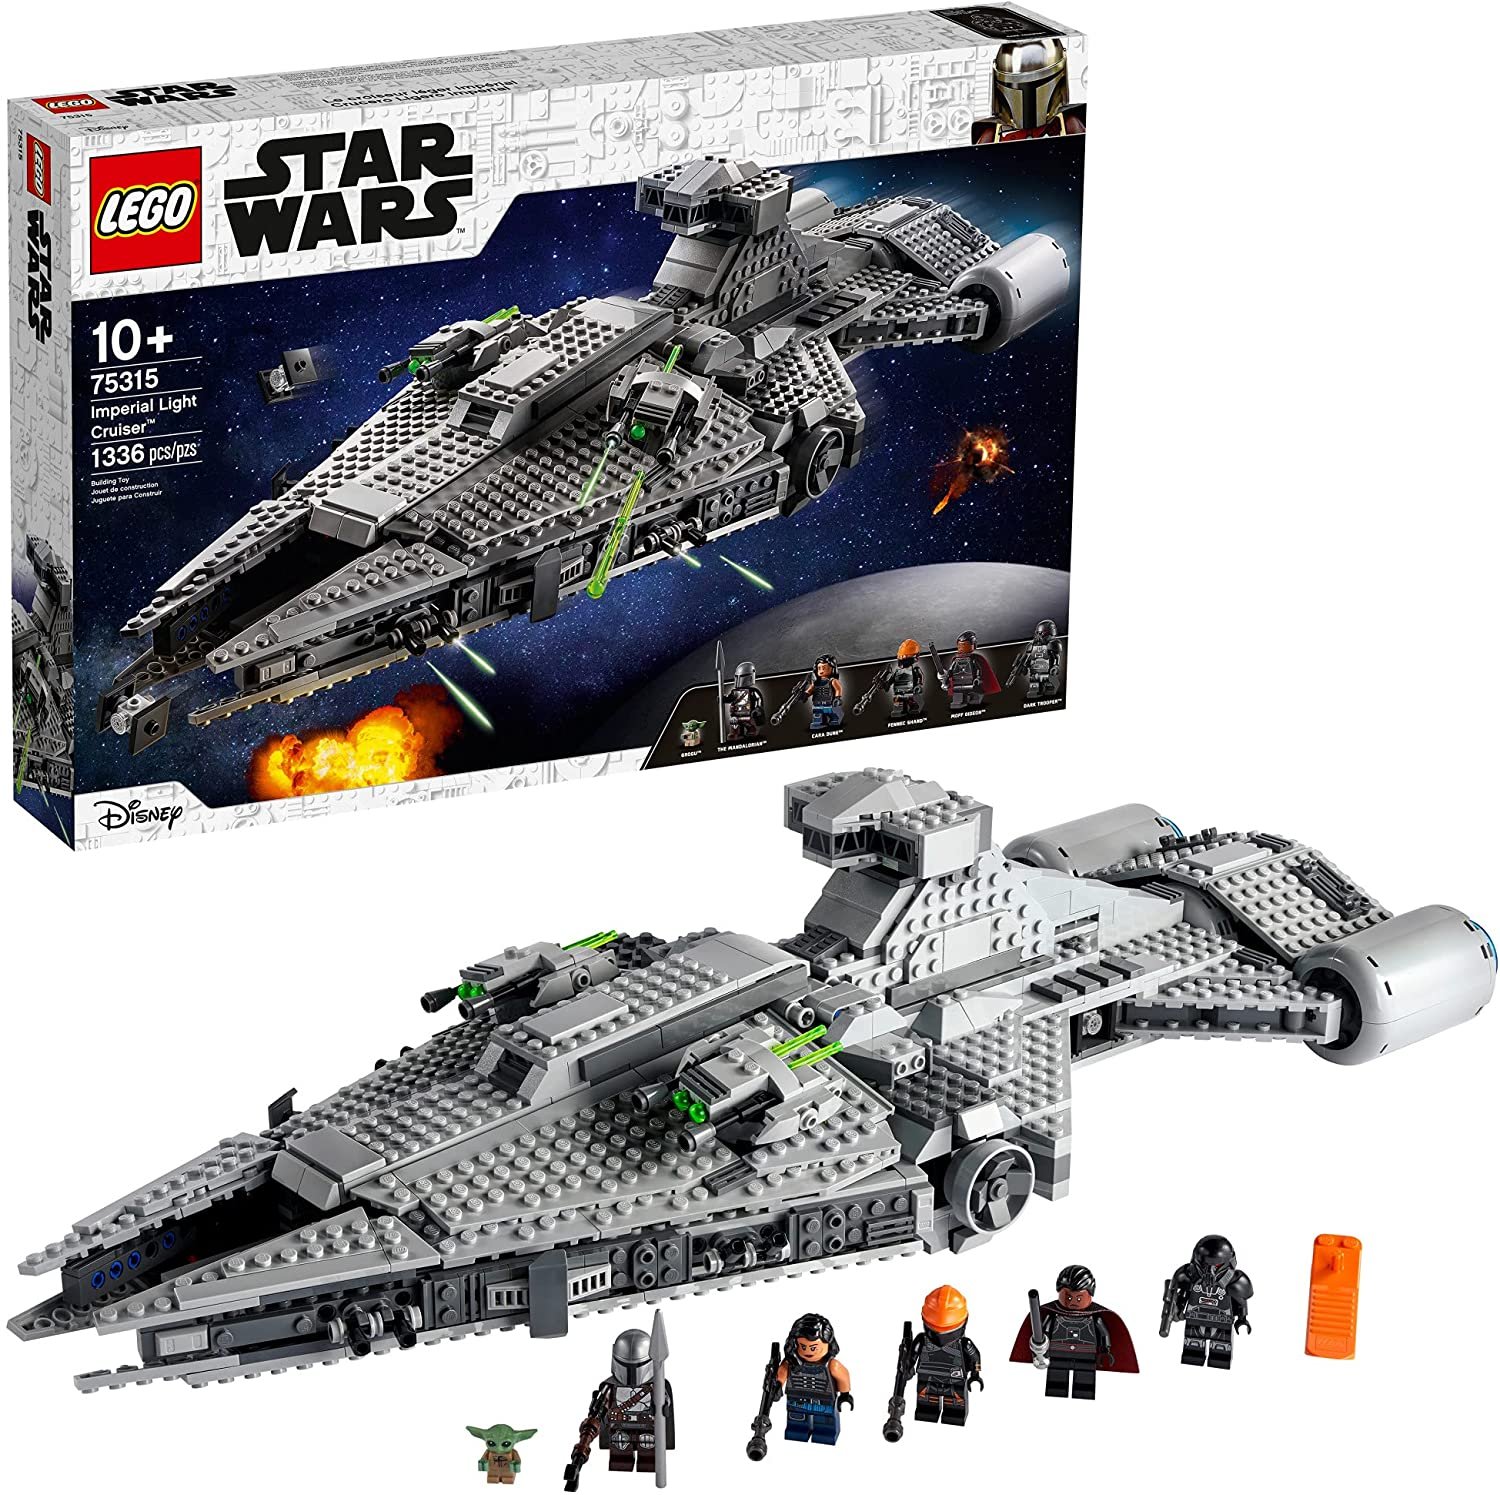 LEGO Star Wars Imperial Light Cruiser 75315 Awesome Toy Building Kit for Kids, (1,336 Pieces)